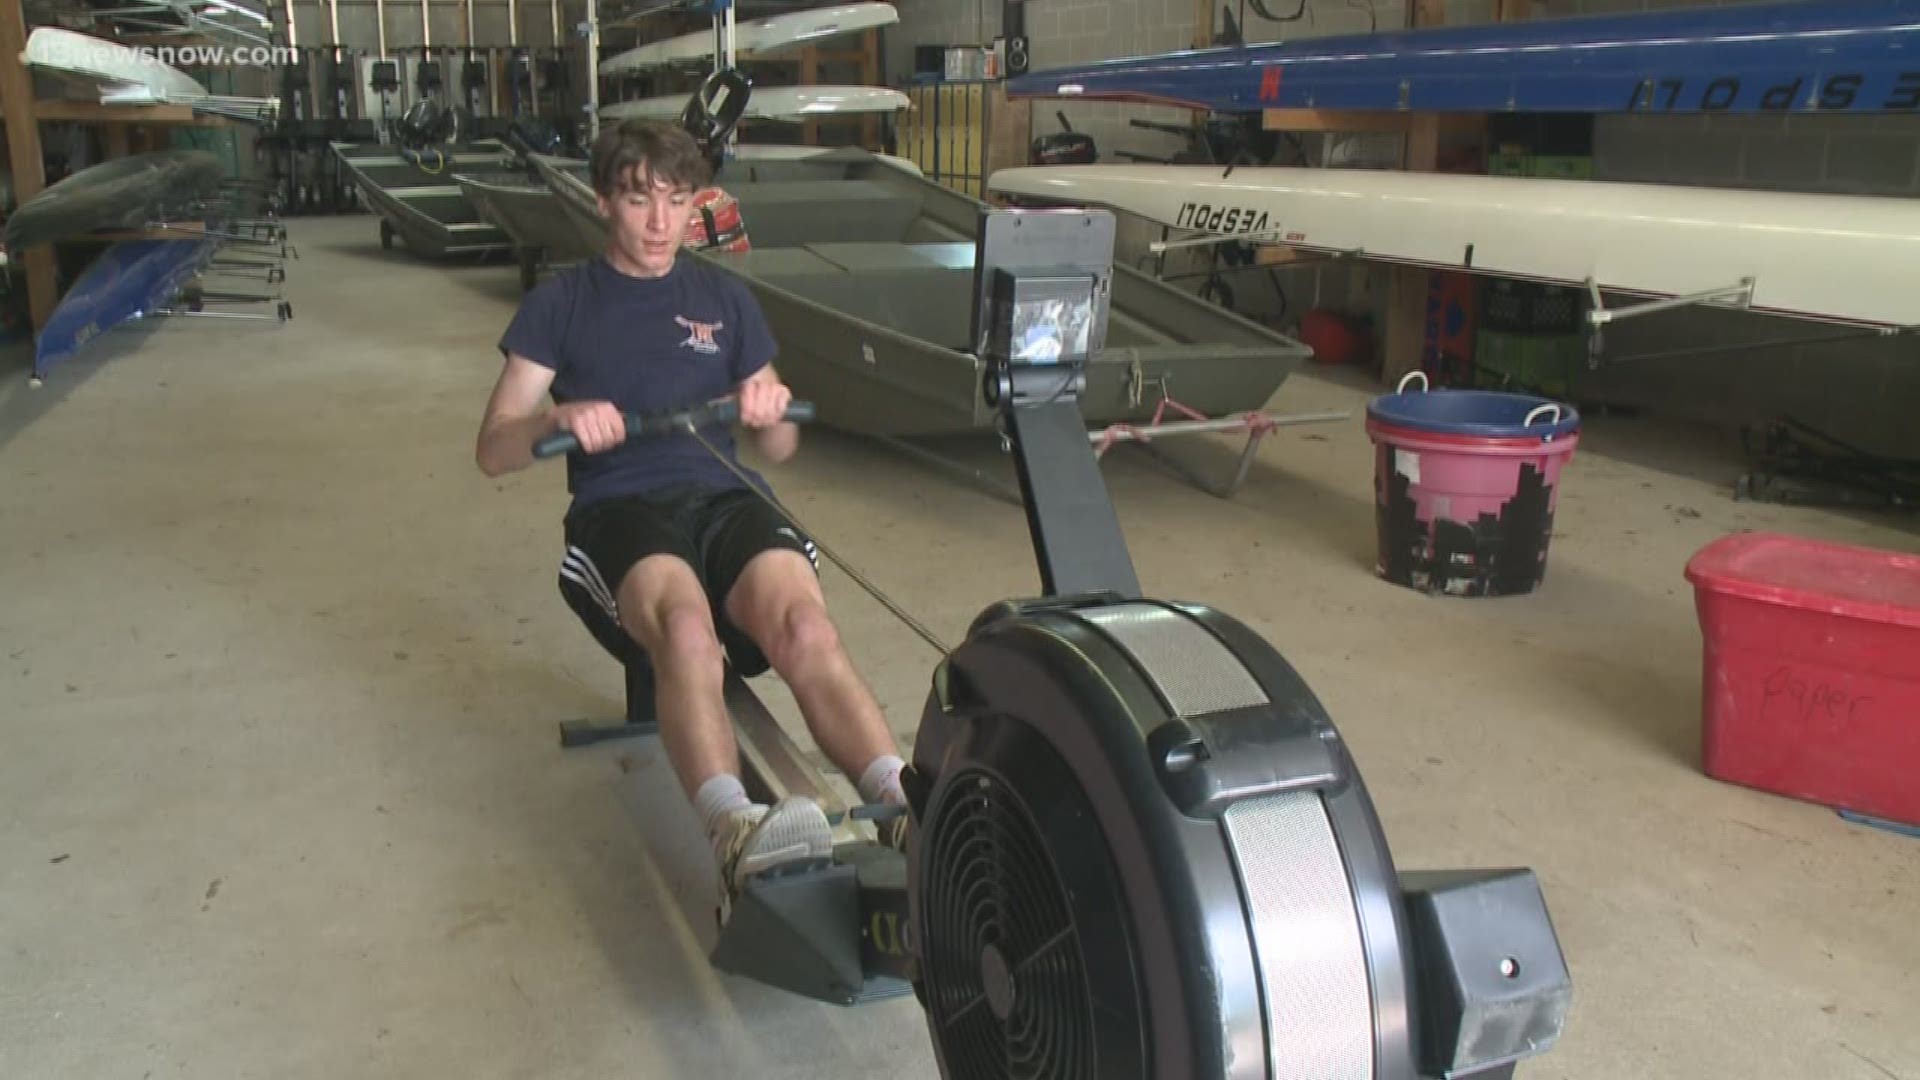 Maury High School rower, Zach Grossman is like many area athletes who have to patiently wait to play due to the coronavirus outbreak.